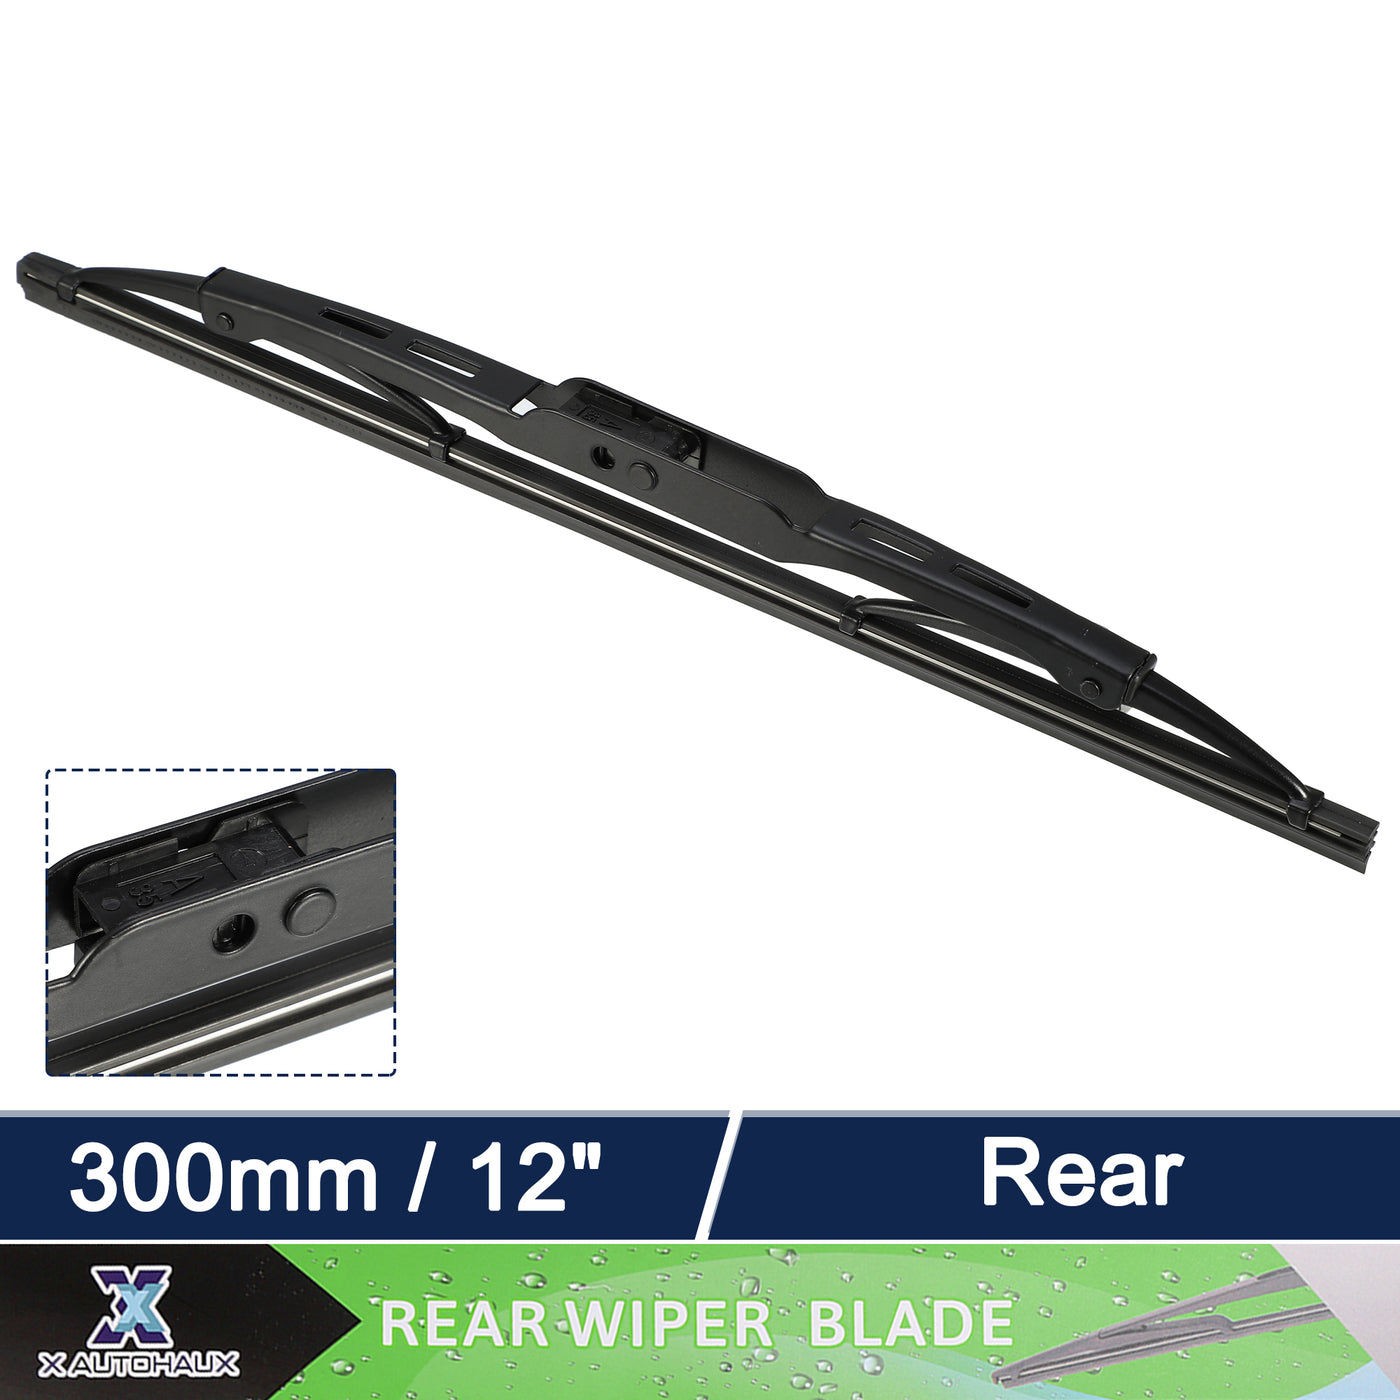 X AUTOHAUX Rear Windshield Wiper Blade 12" for Chevrolet Equinox 2010-2016 for Cadillac SRX 2010-2016 for Cadillac XT5 2016-2020 for All Cars in 7x2.5, 9x3 Hook